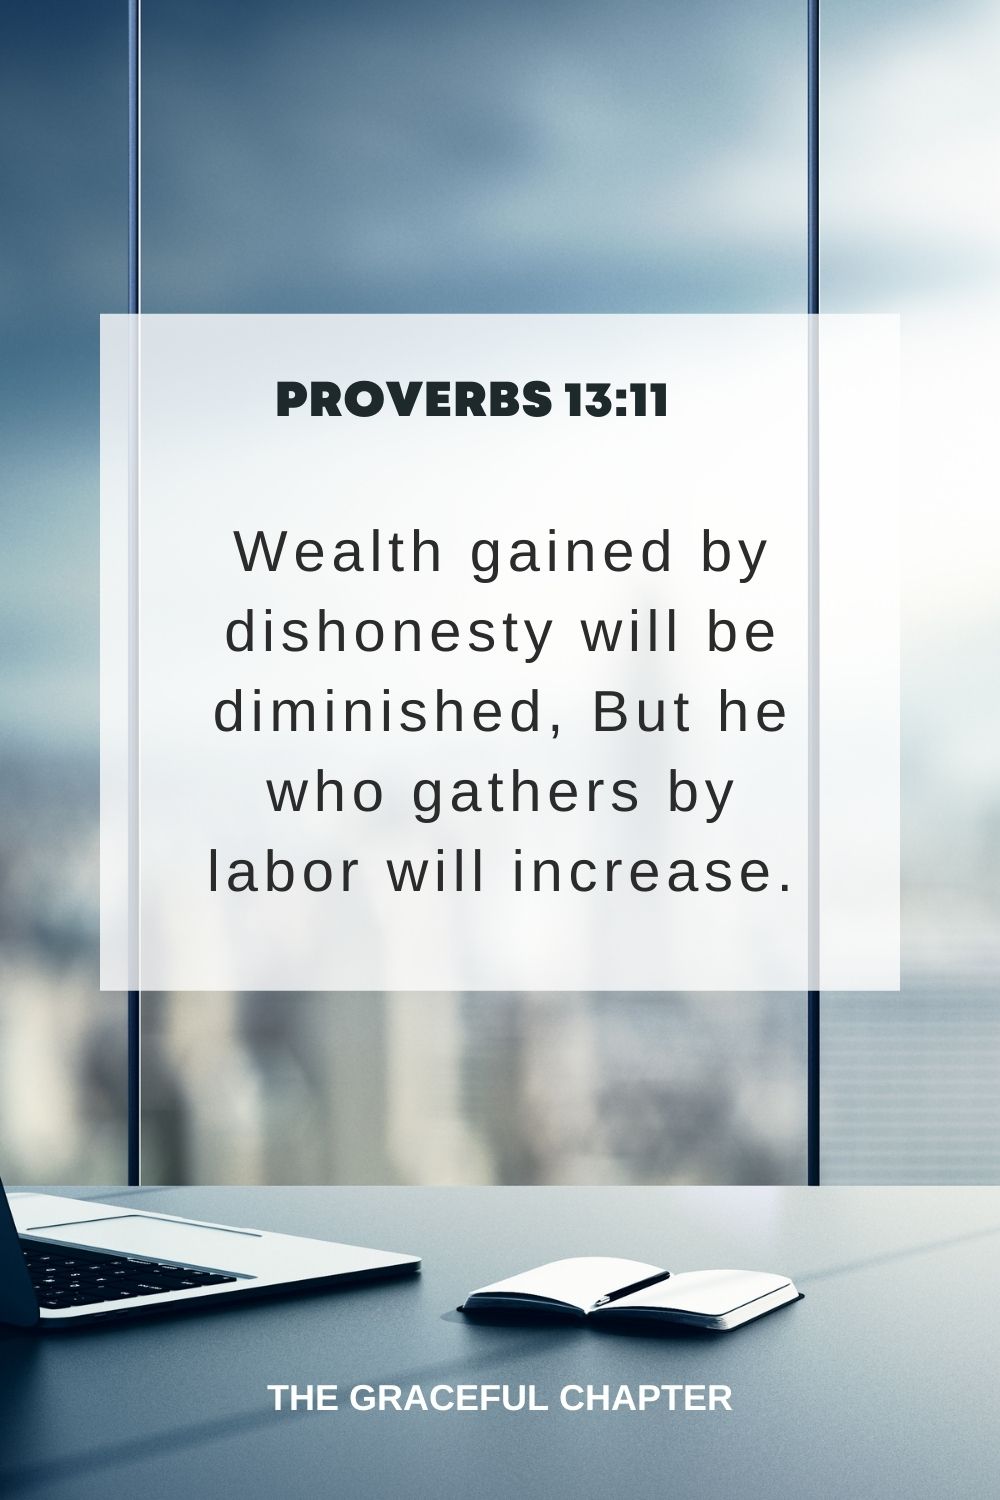 Wealth gained by dishonesty will be diminished, But he who gathers by labor will increase. Proverbs 13:11